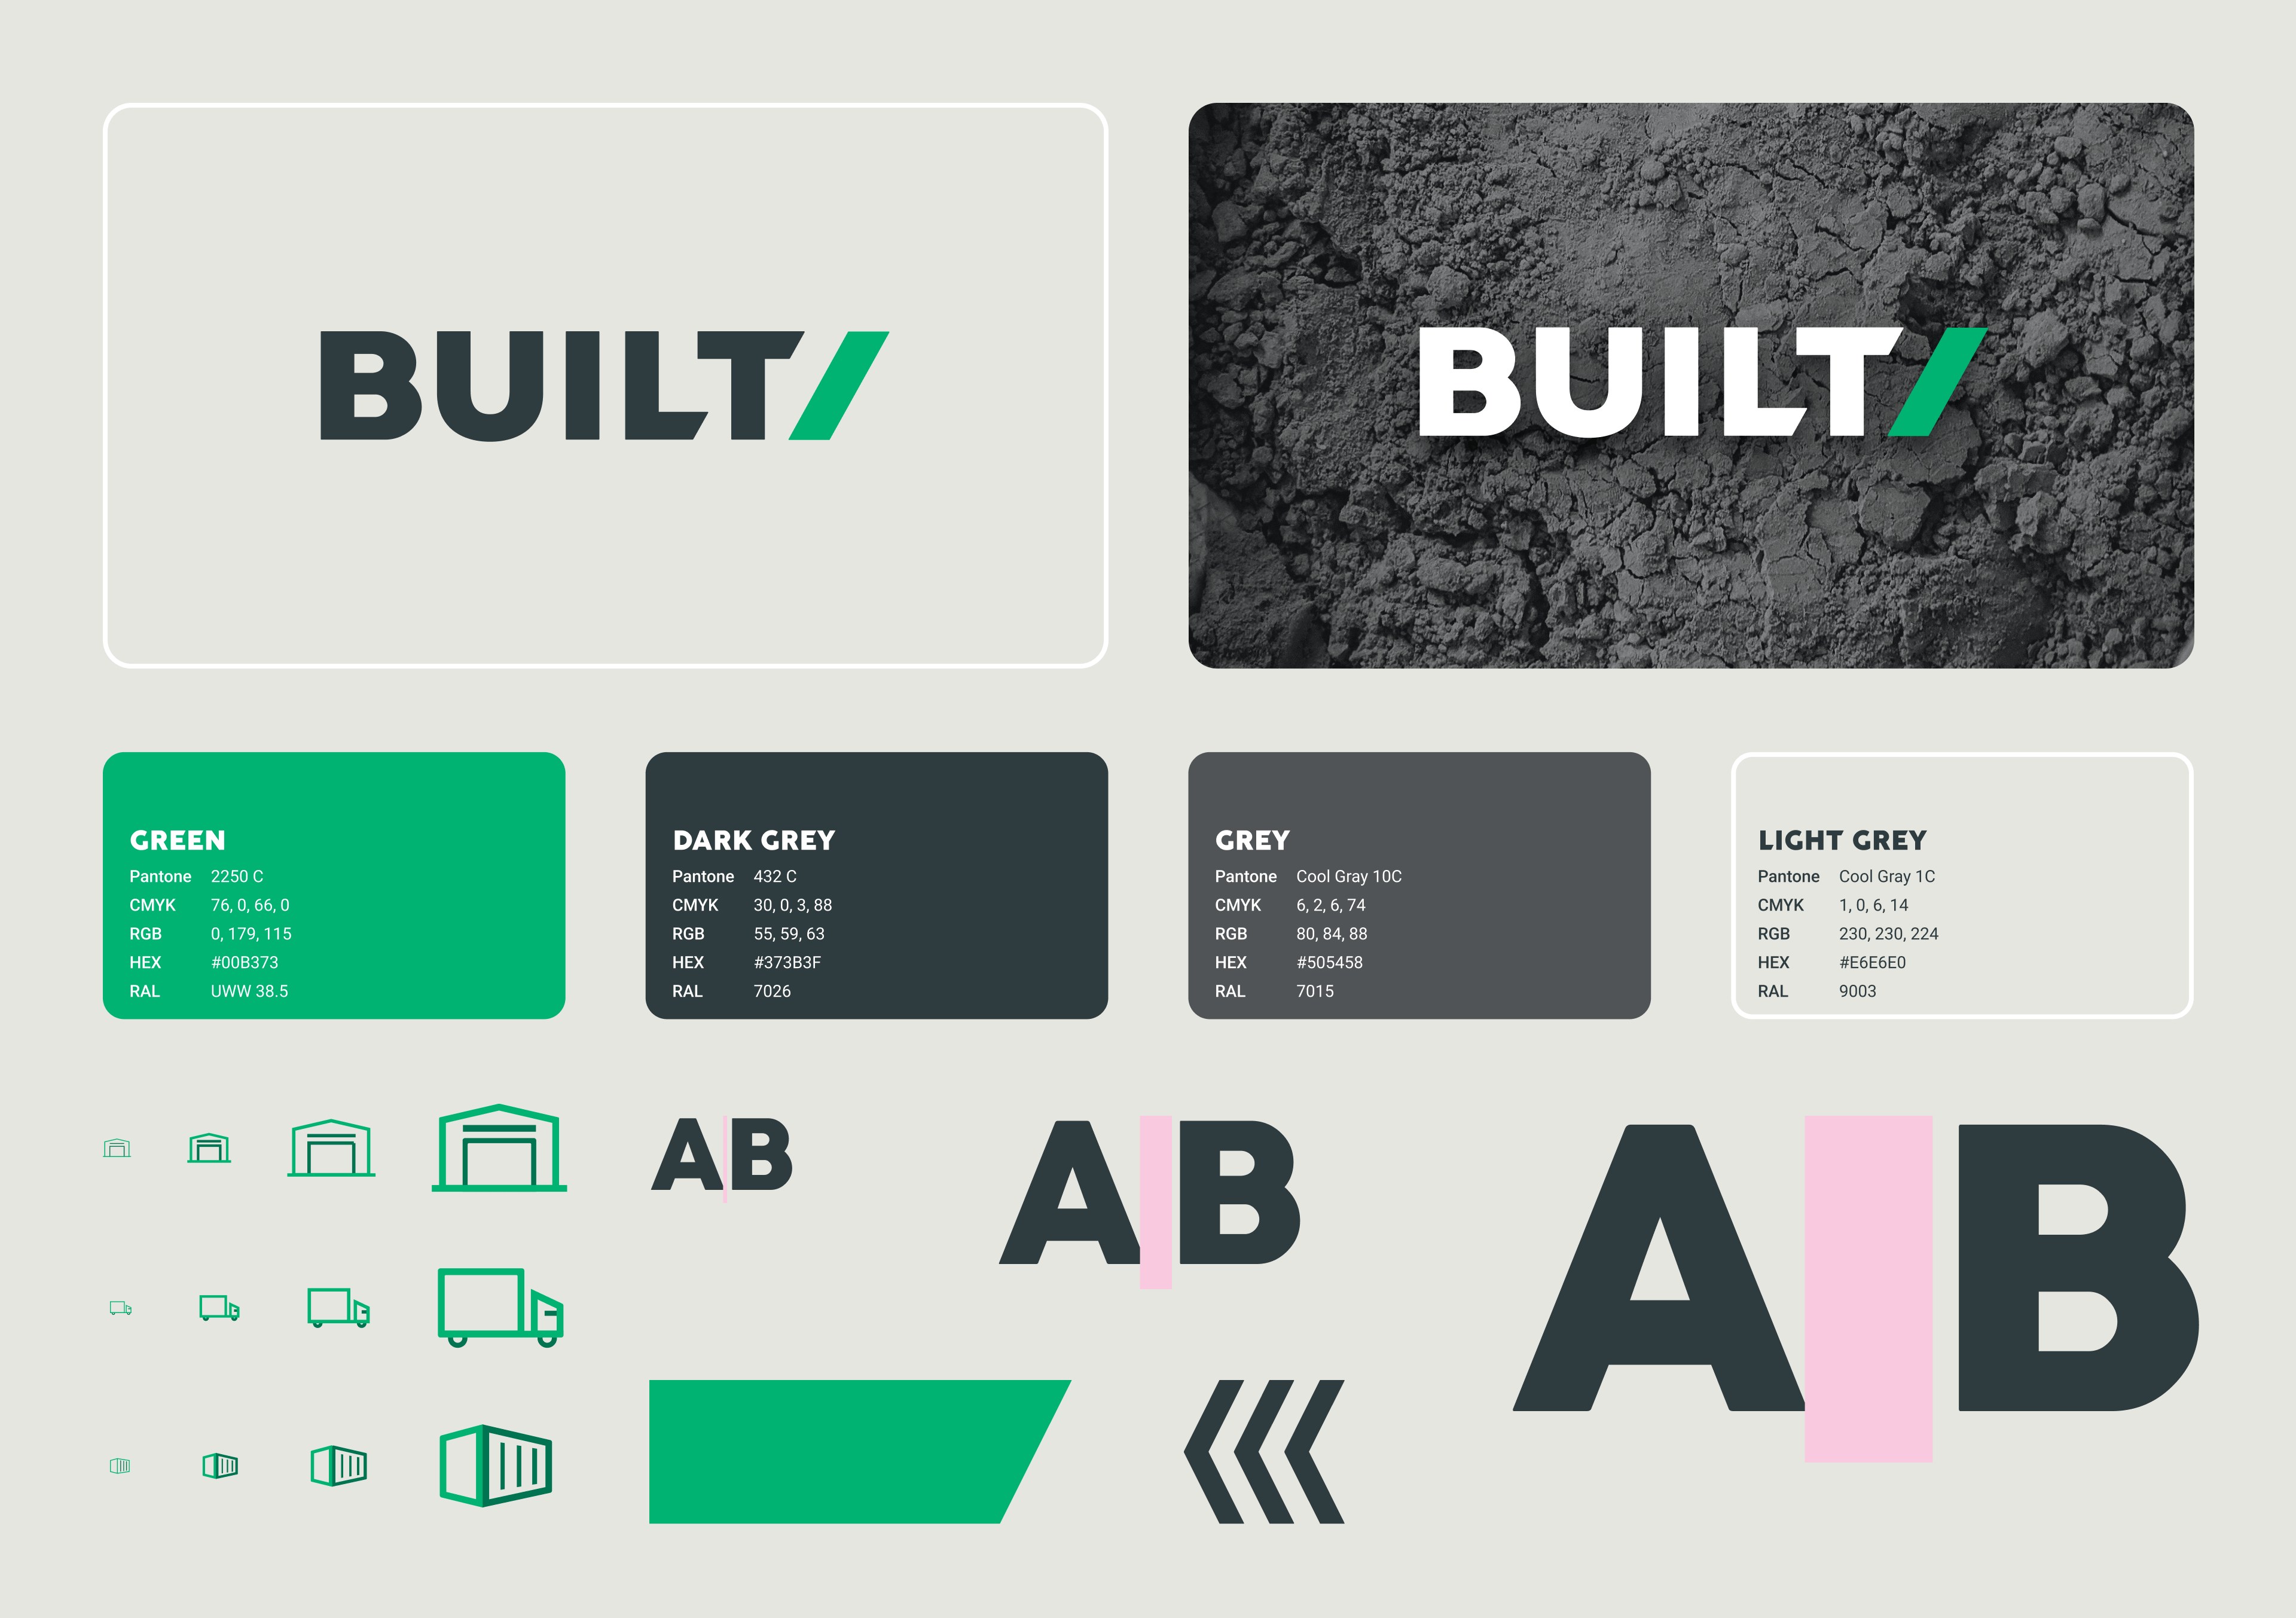 An image showing different components from the Built design system. It shows logos, colour styles and iconography.